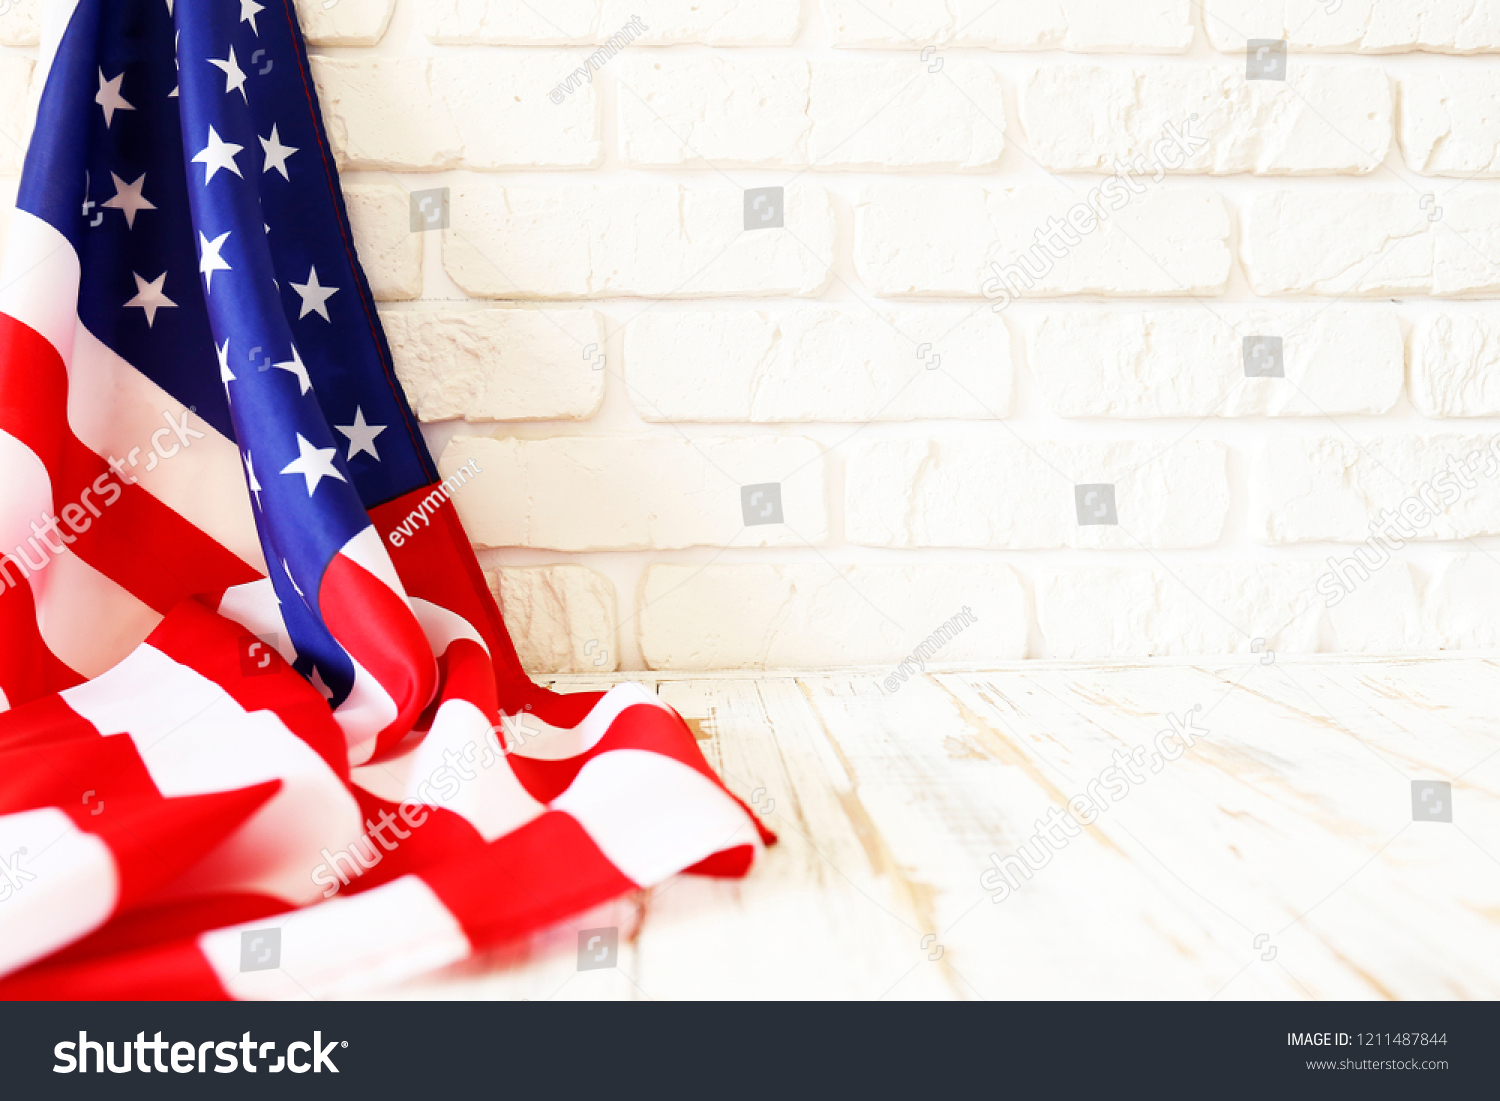 Close up of ruffled American flag over lofty white brick wall with a lot of copy space. Patriotic background for national holidays in United States of America. Stars and stripes. #1211487844